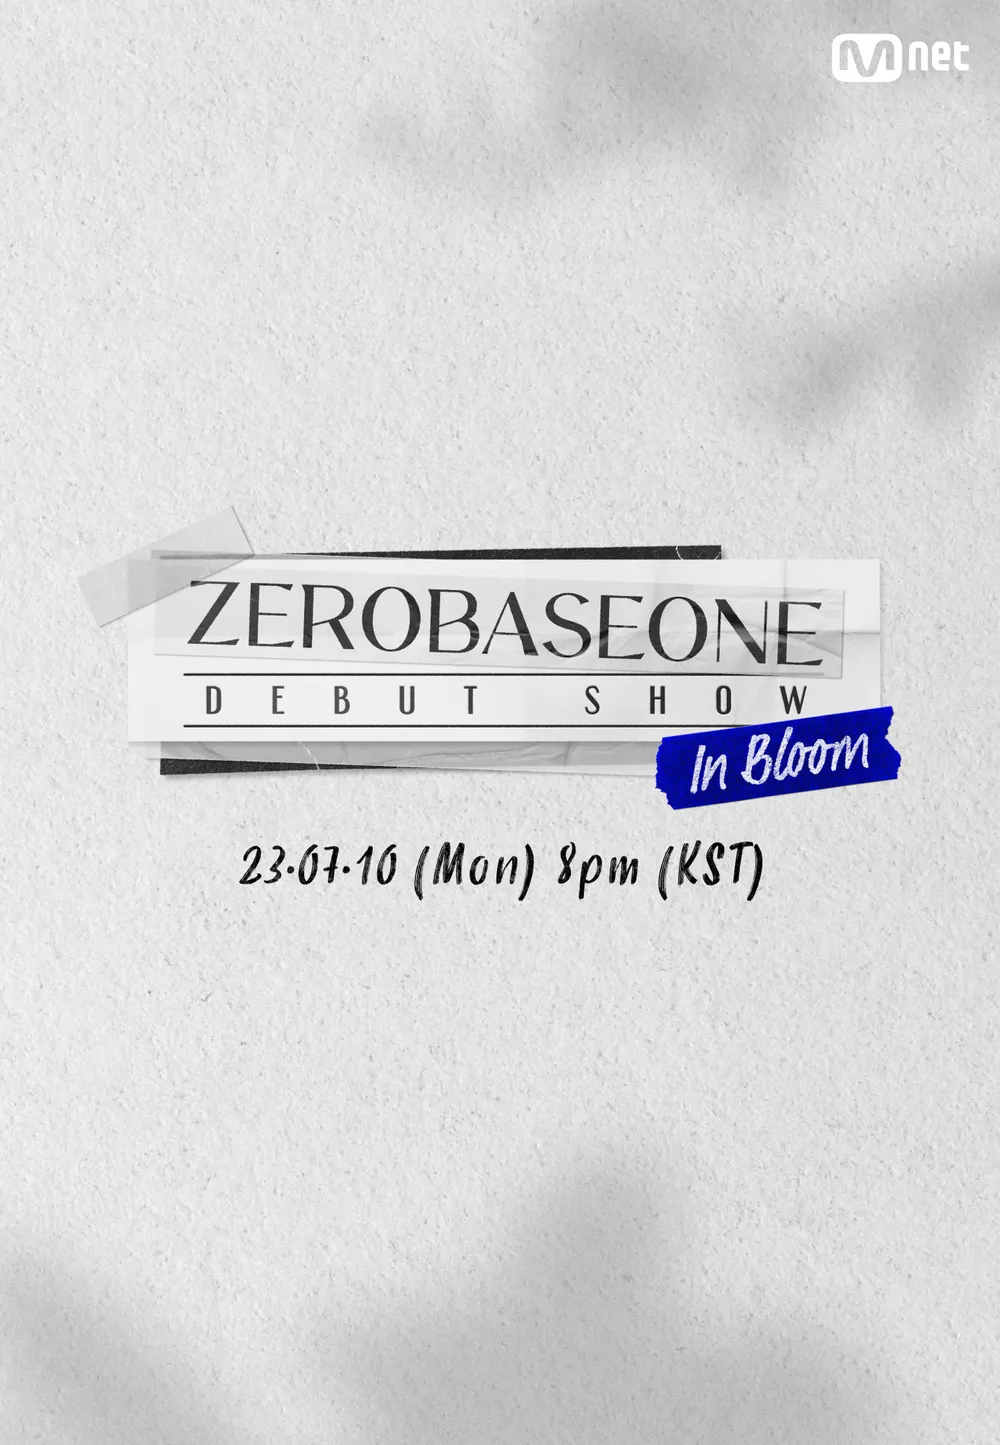 ZeroBaseOne Debut Show: In Bloom